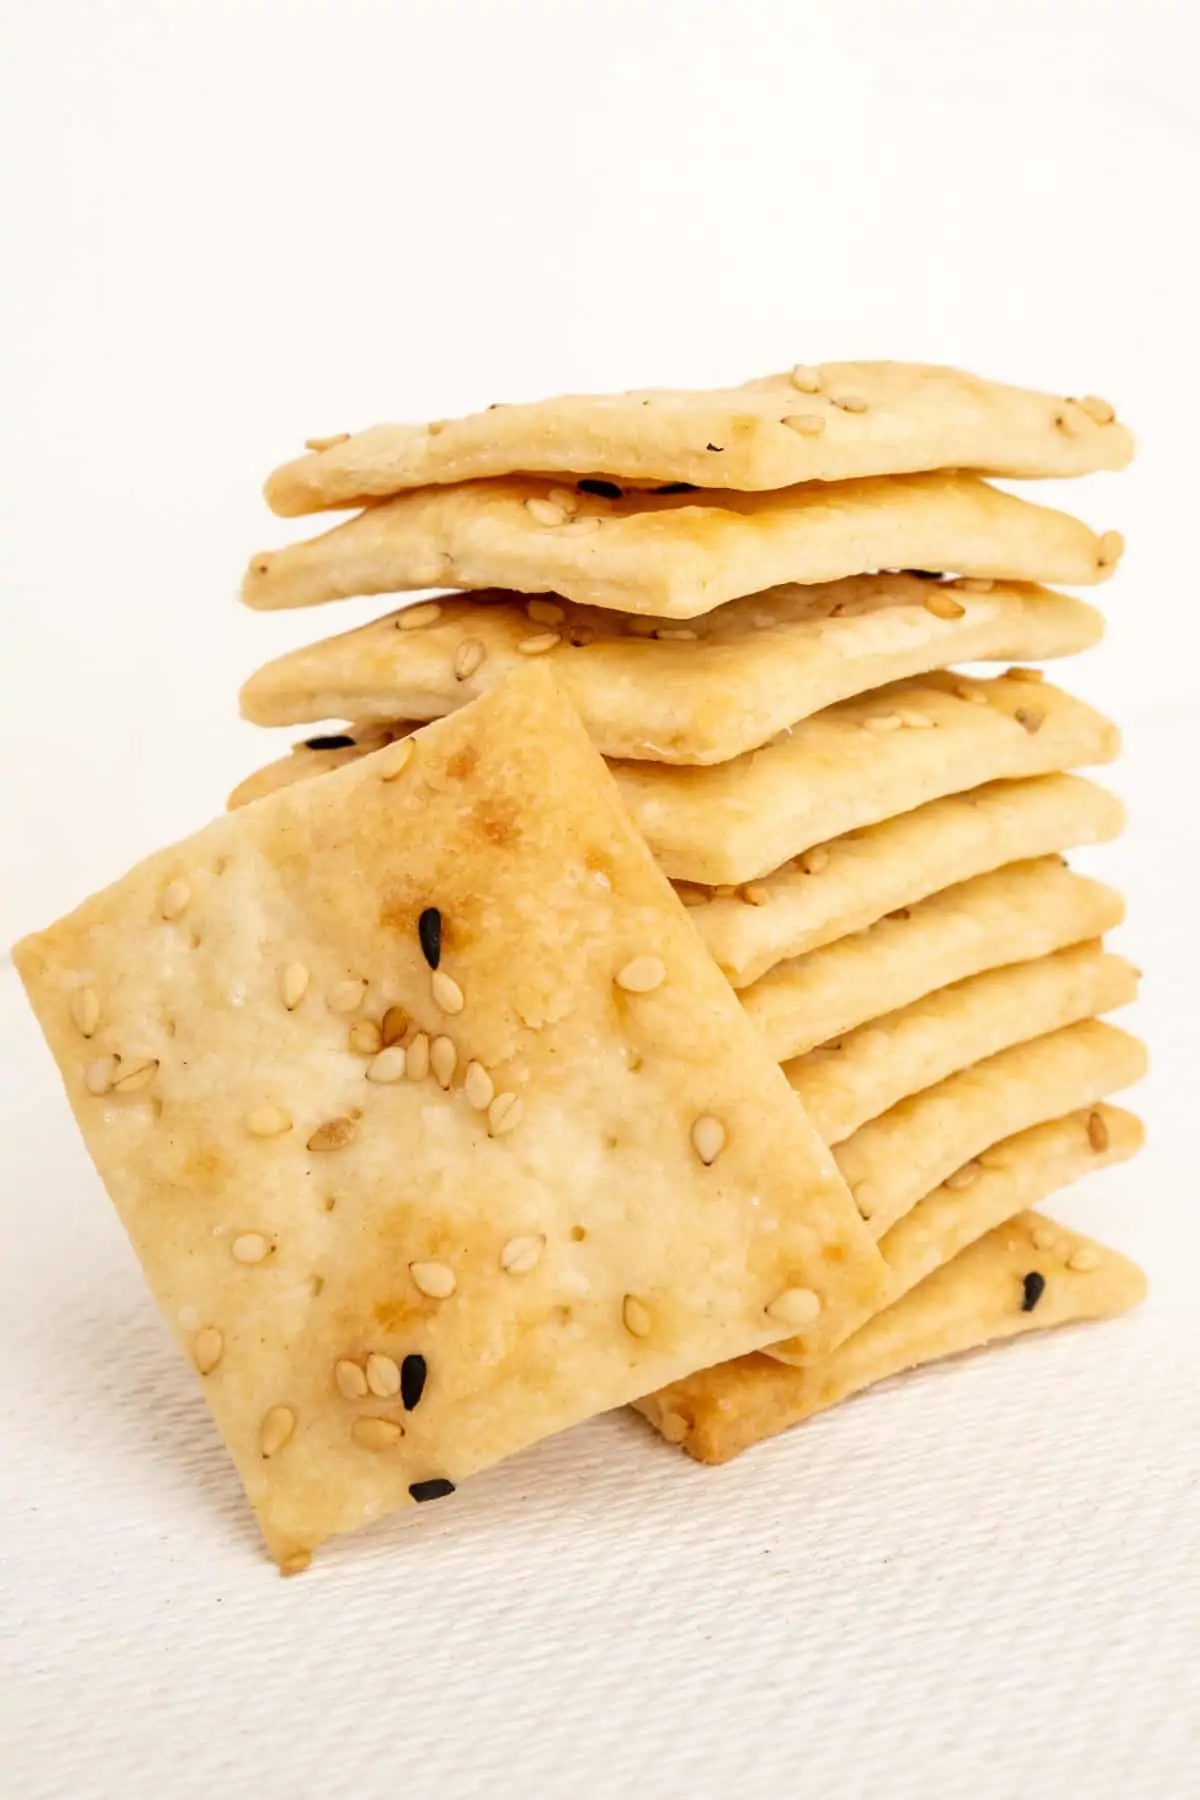 A stack of small sourdough crackers topped with sesame and nigella seeds.